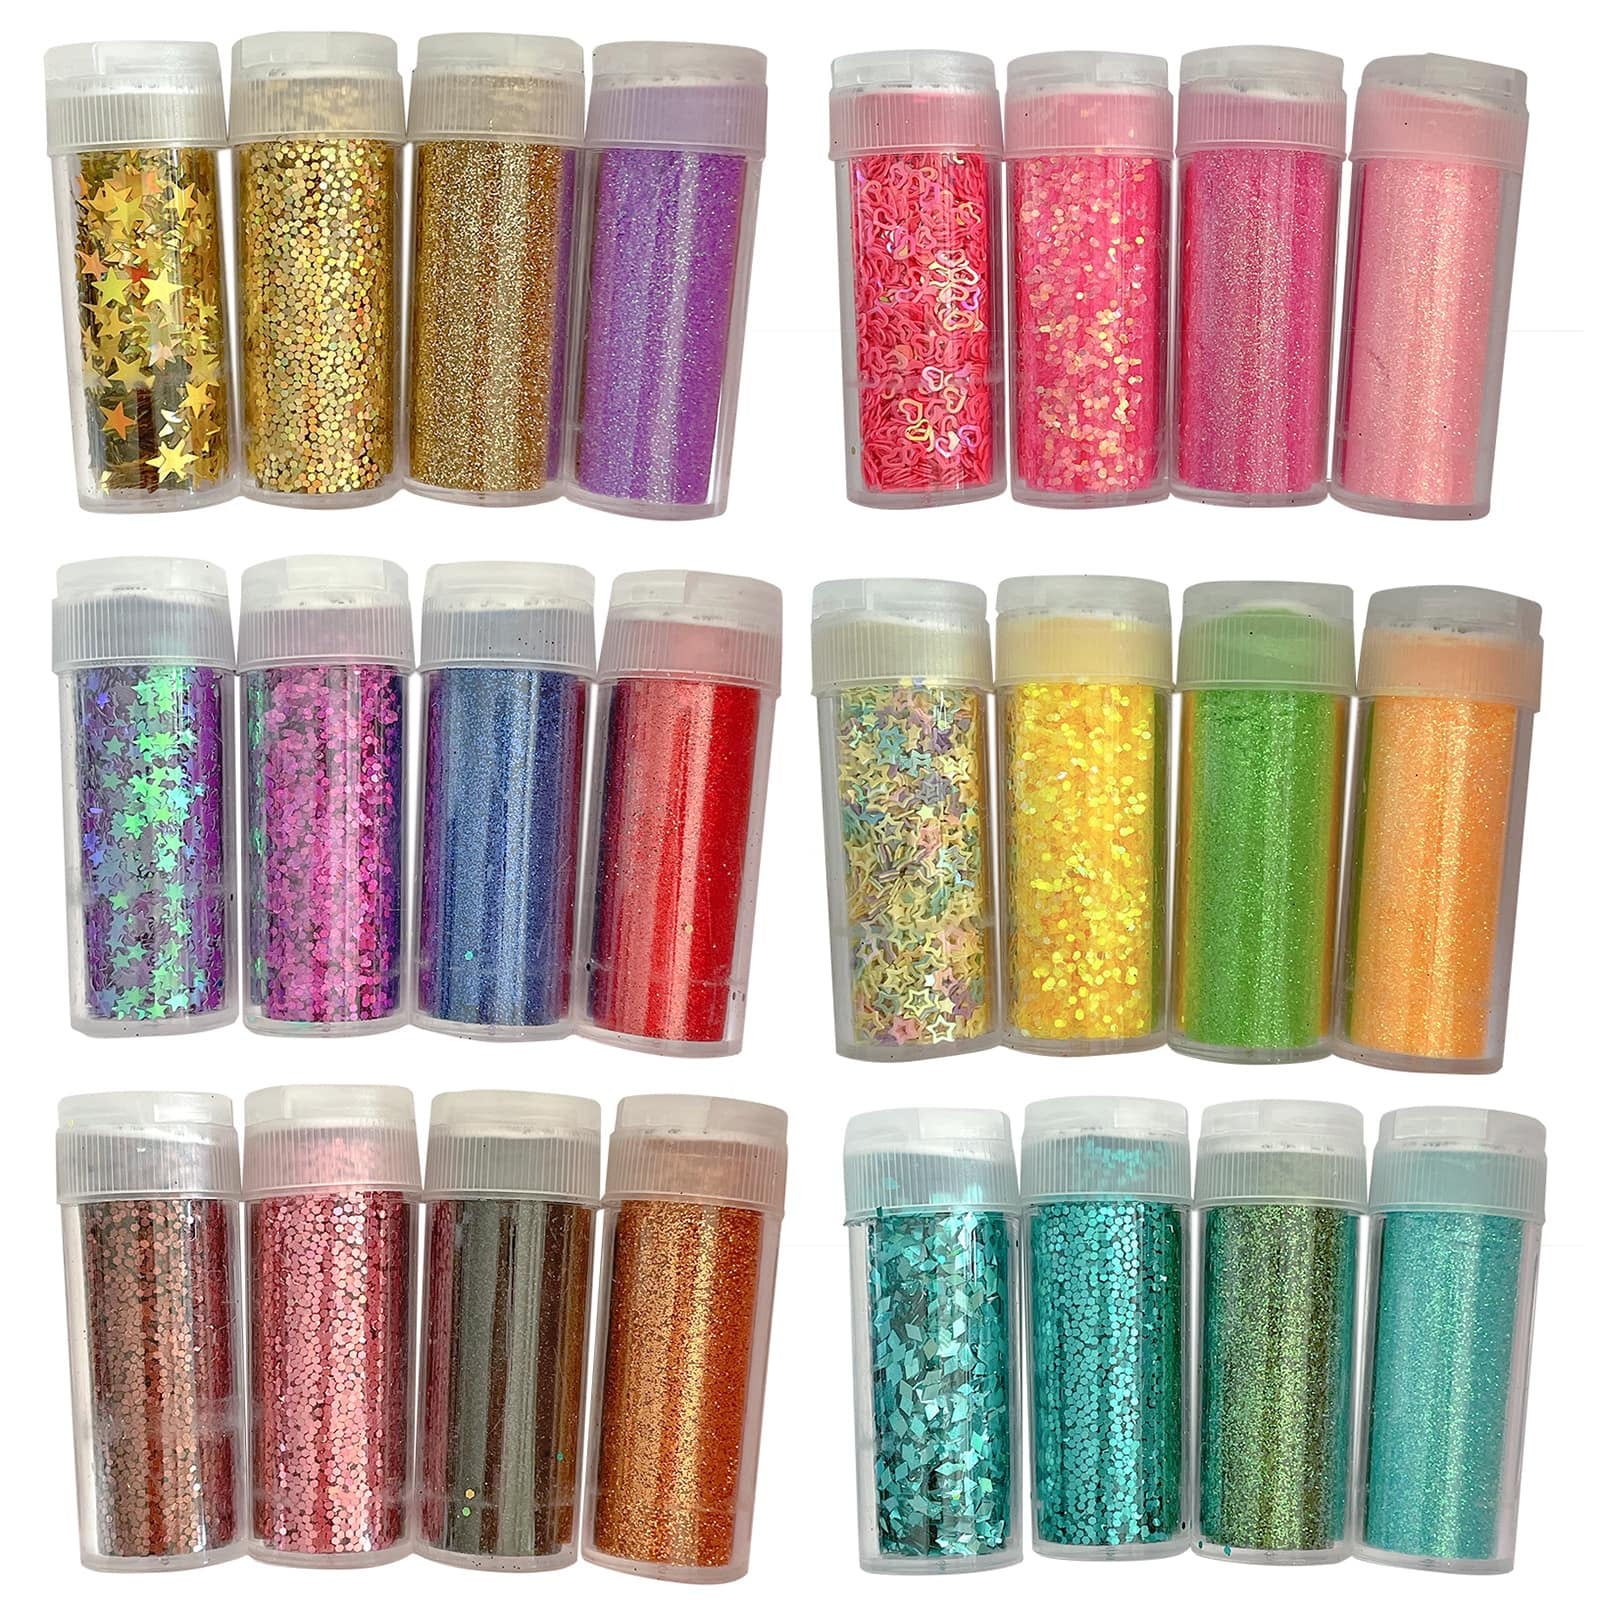  Extra Fine Glitter Set by Recollections, 28 Colors